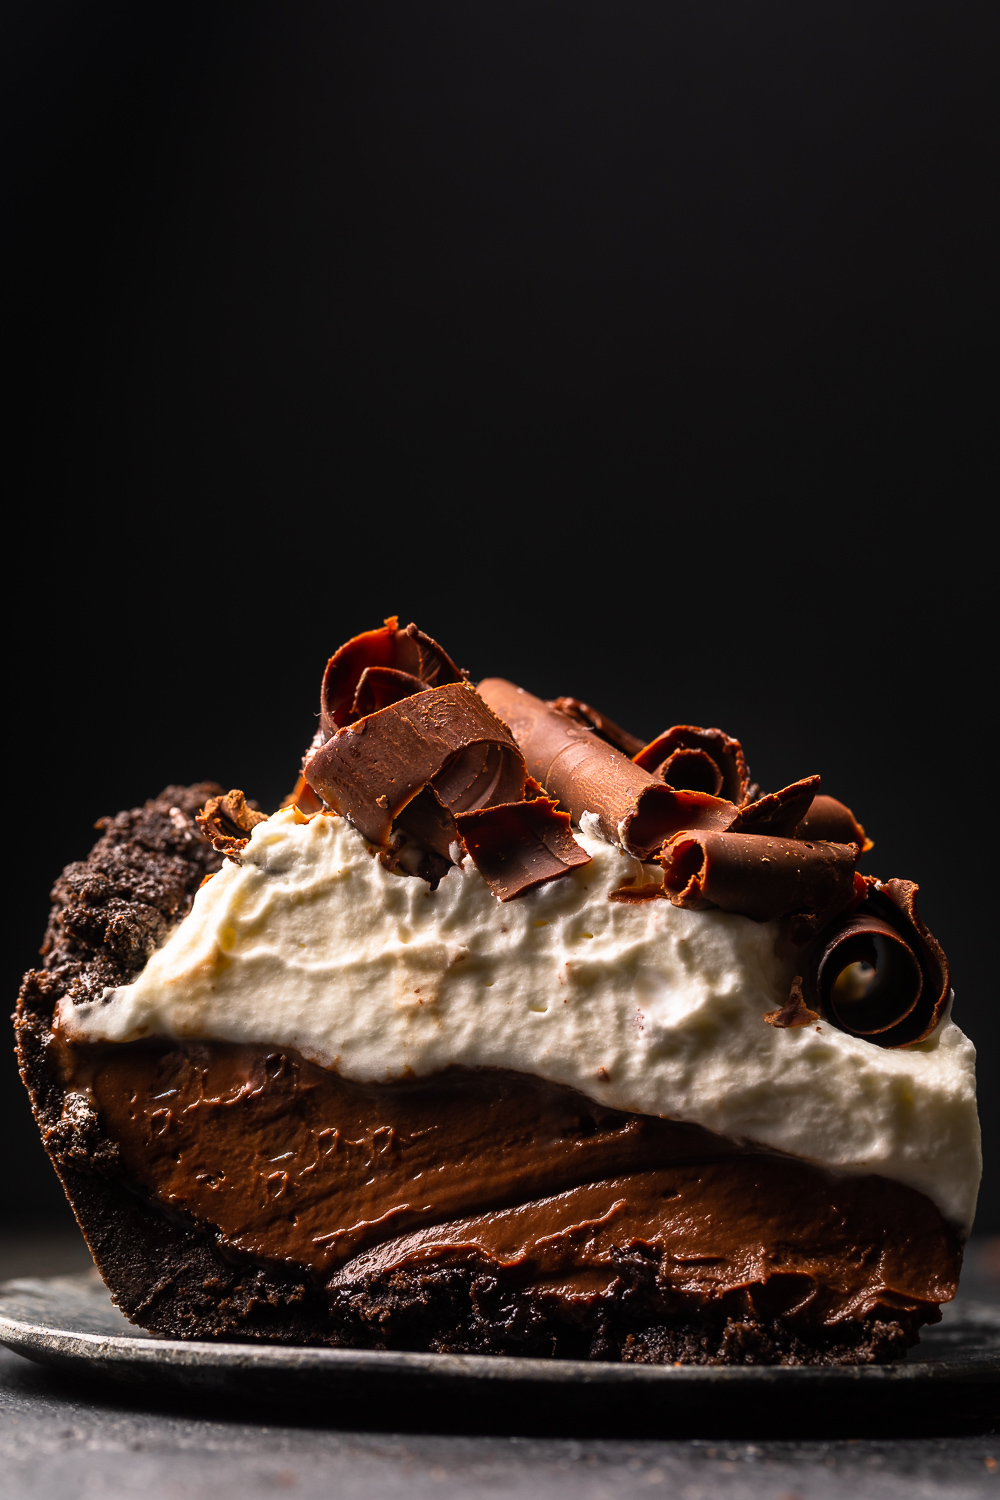 This over-the-top Espresso Chocolate Pudding Pie is a chocolate lovers dream come true! Featuring a chocolate cookie crust, silky smooth espresso chocolate pudding, and a luscious layer of freshly whipped cream, this recipe is always a crowd-pleaser! Top with chocolate curls for a show stopping presentation!